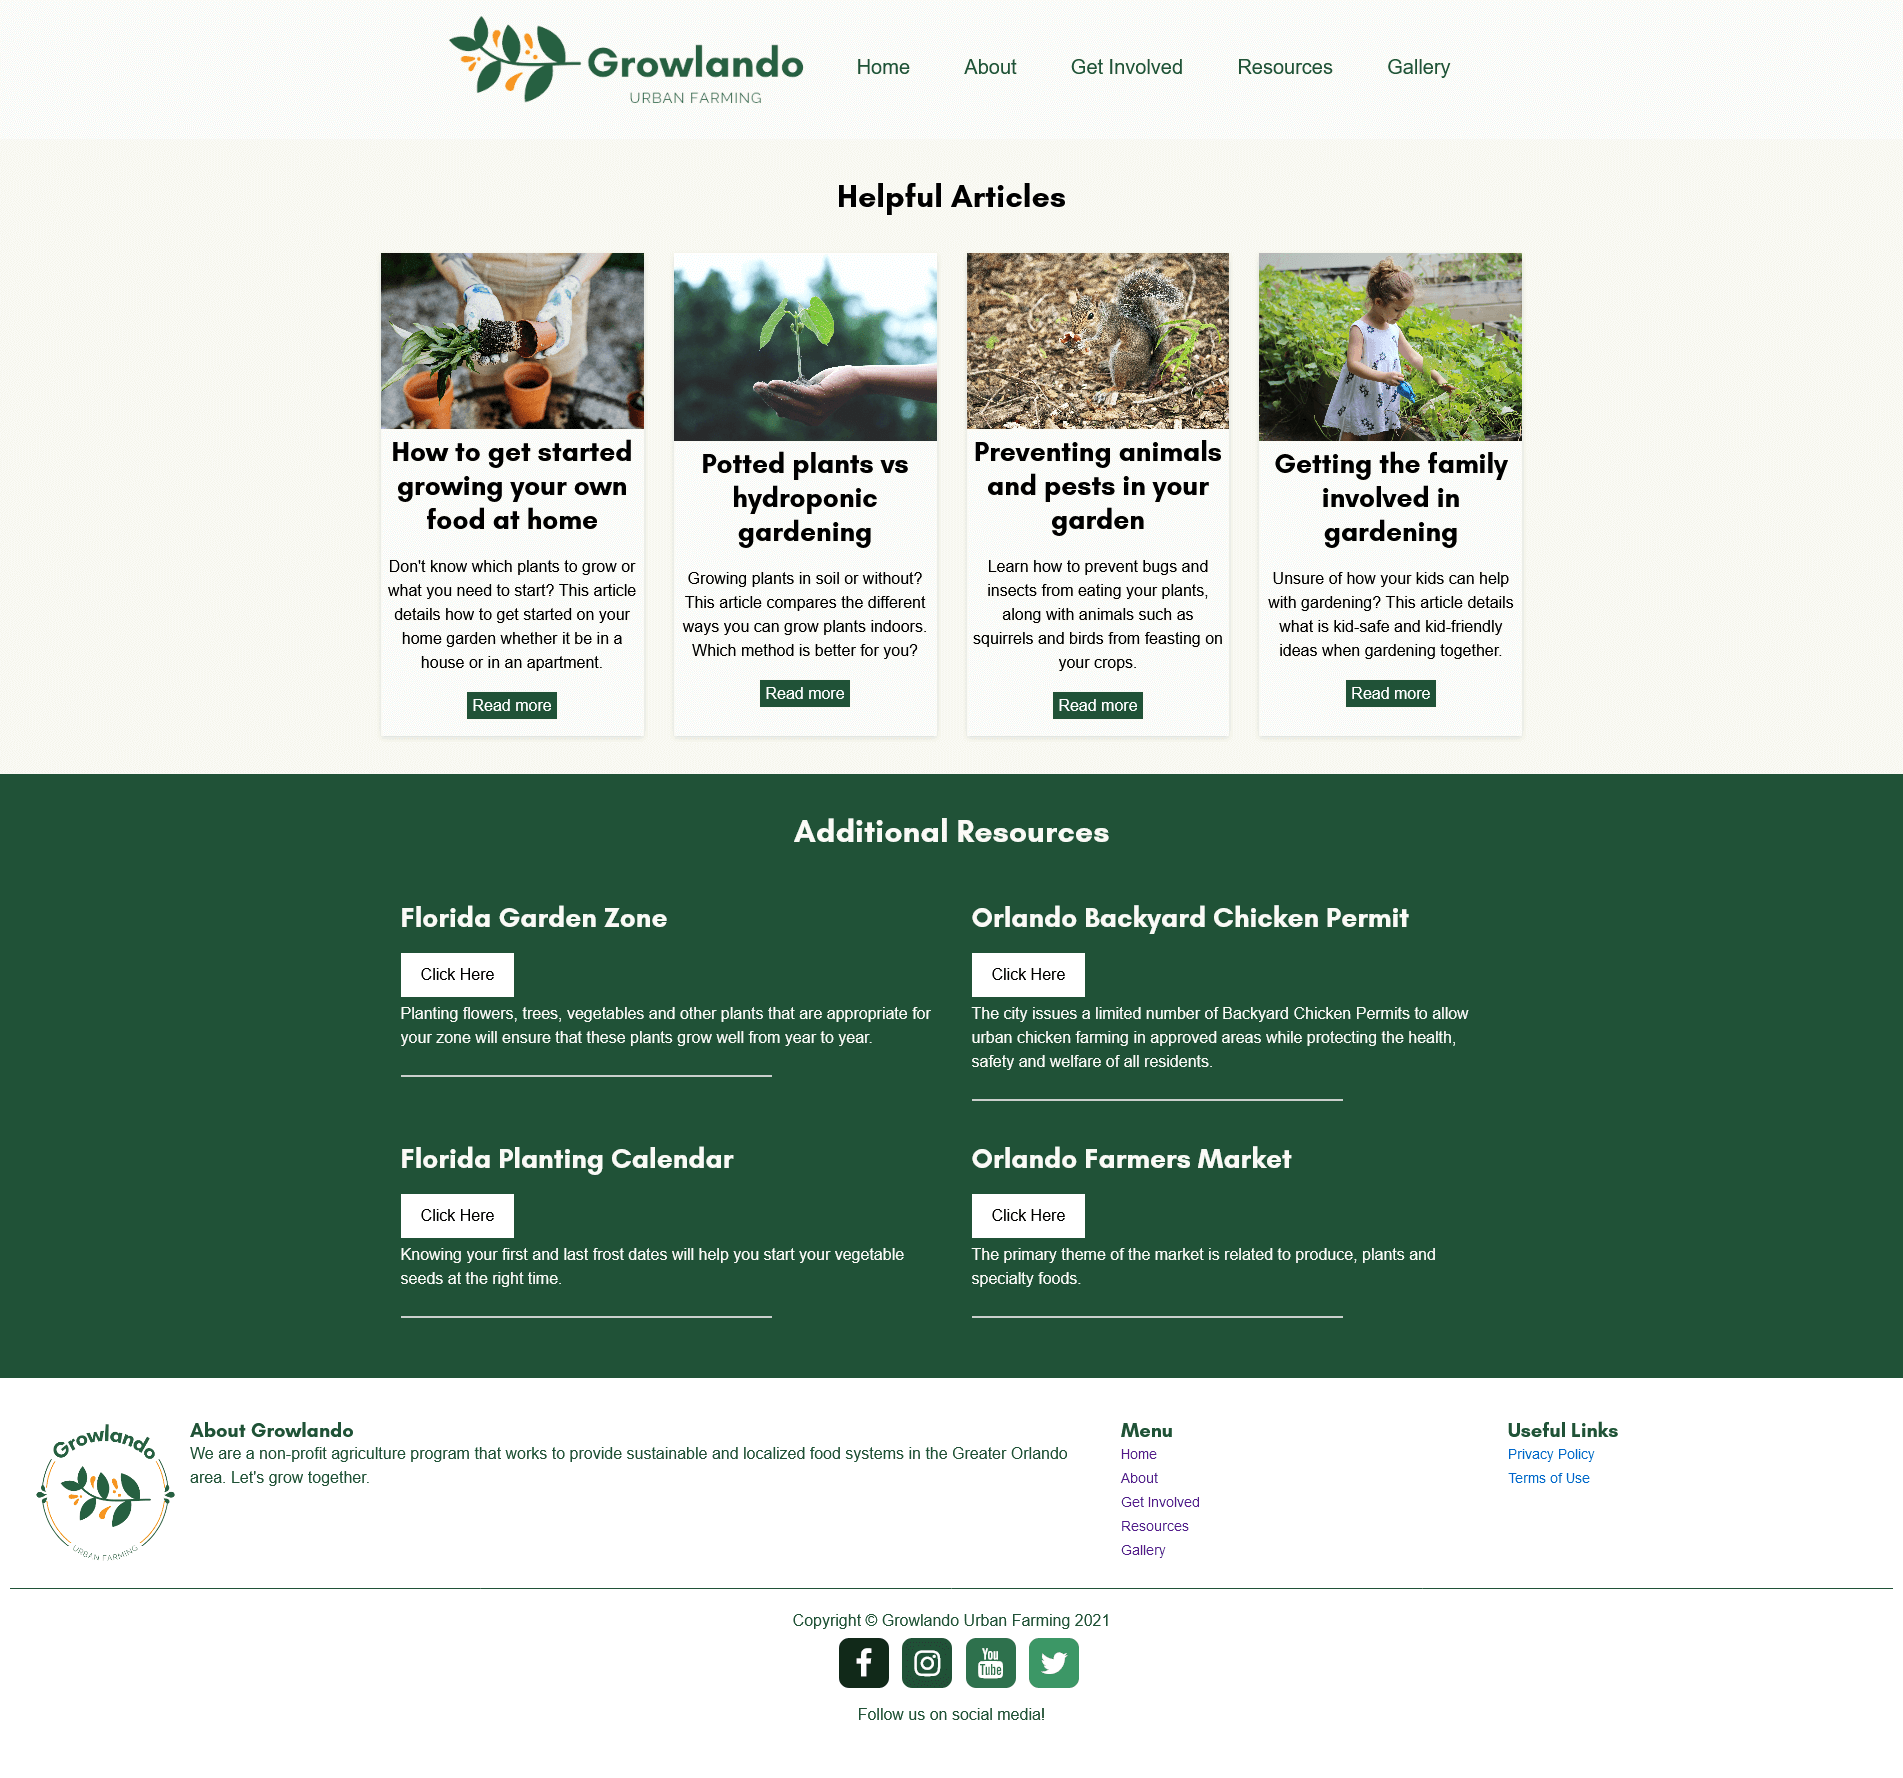 Growlando screenshot of the resources page